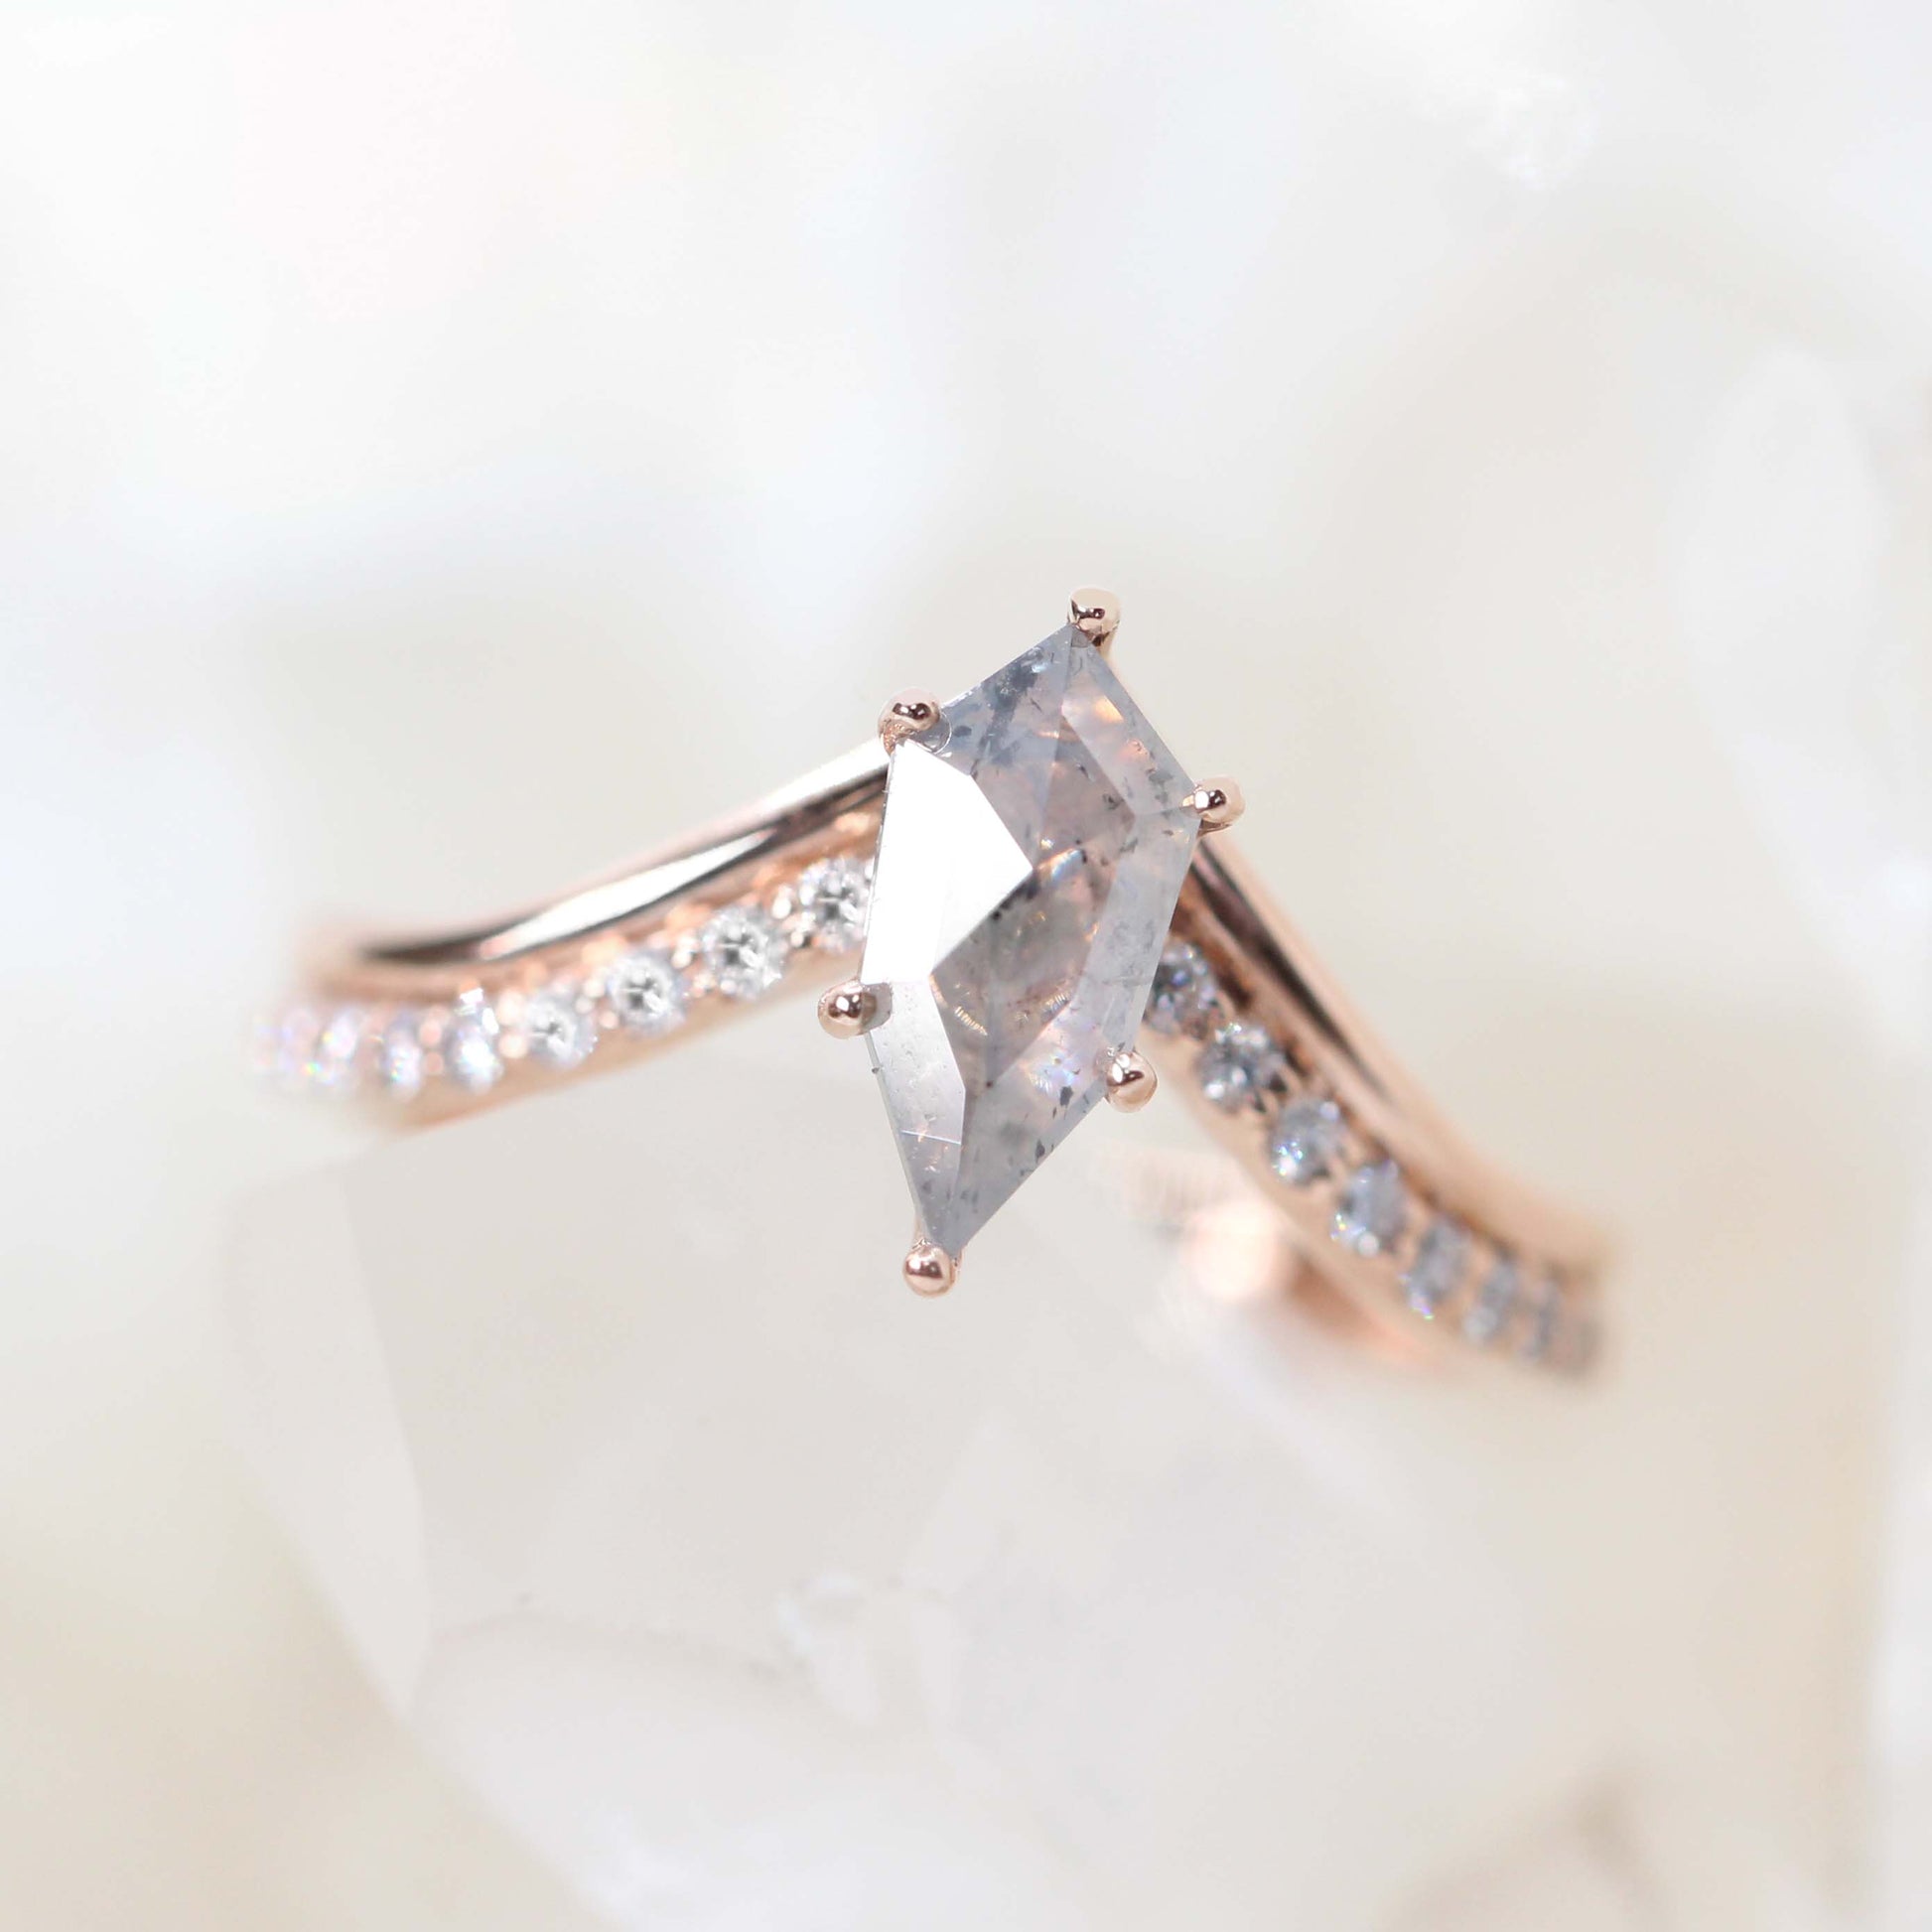 CAELEN (M) Zahra Ring with a 0.85 Carat Stormy Gray Shield Celestial Diamond and White Accent Diamonds in 14k Rose Gold - Ready to Size and Ship - Midwinter Co. Alternative Bridal Rings and Modern Fine Jewelry